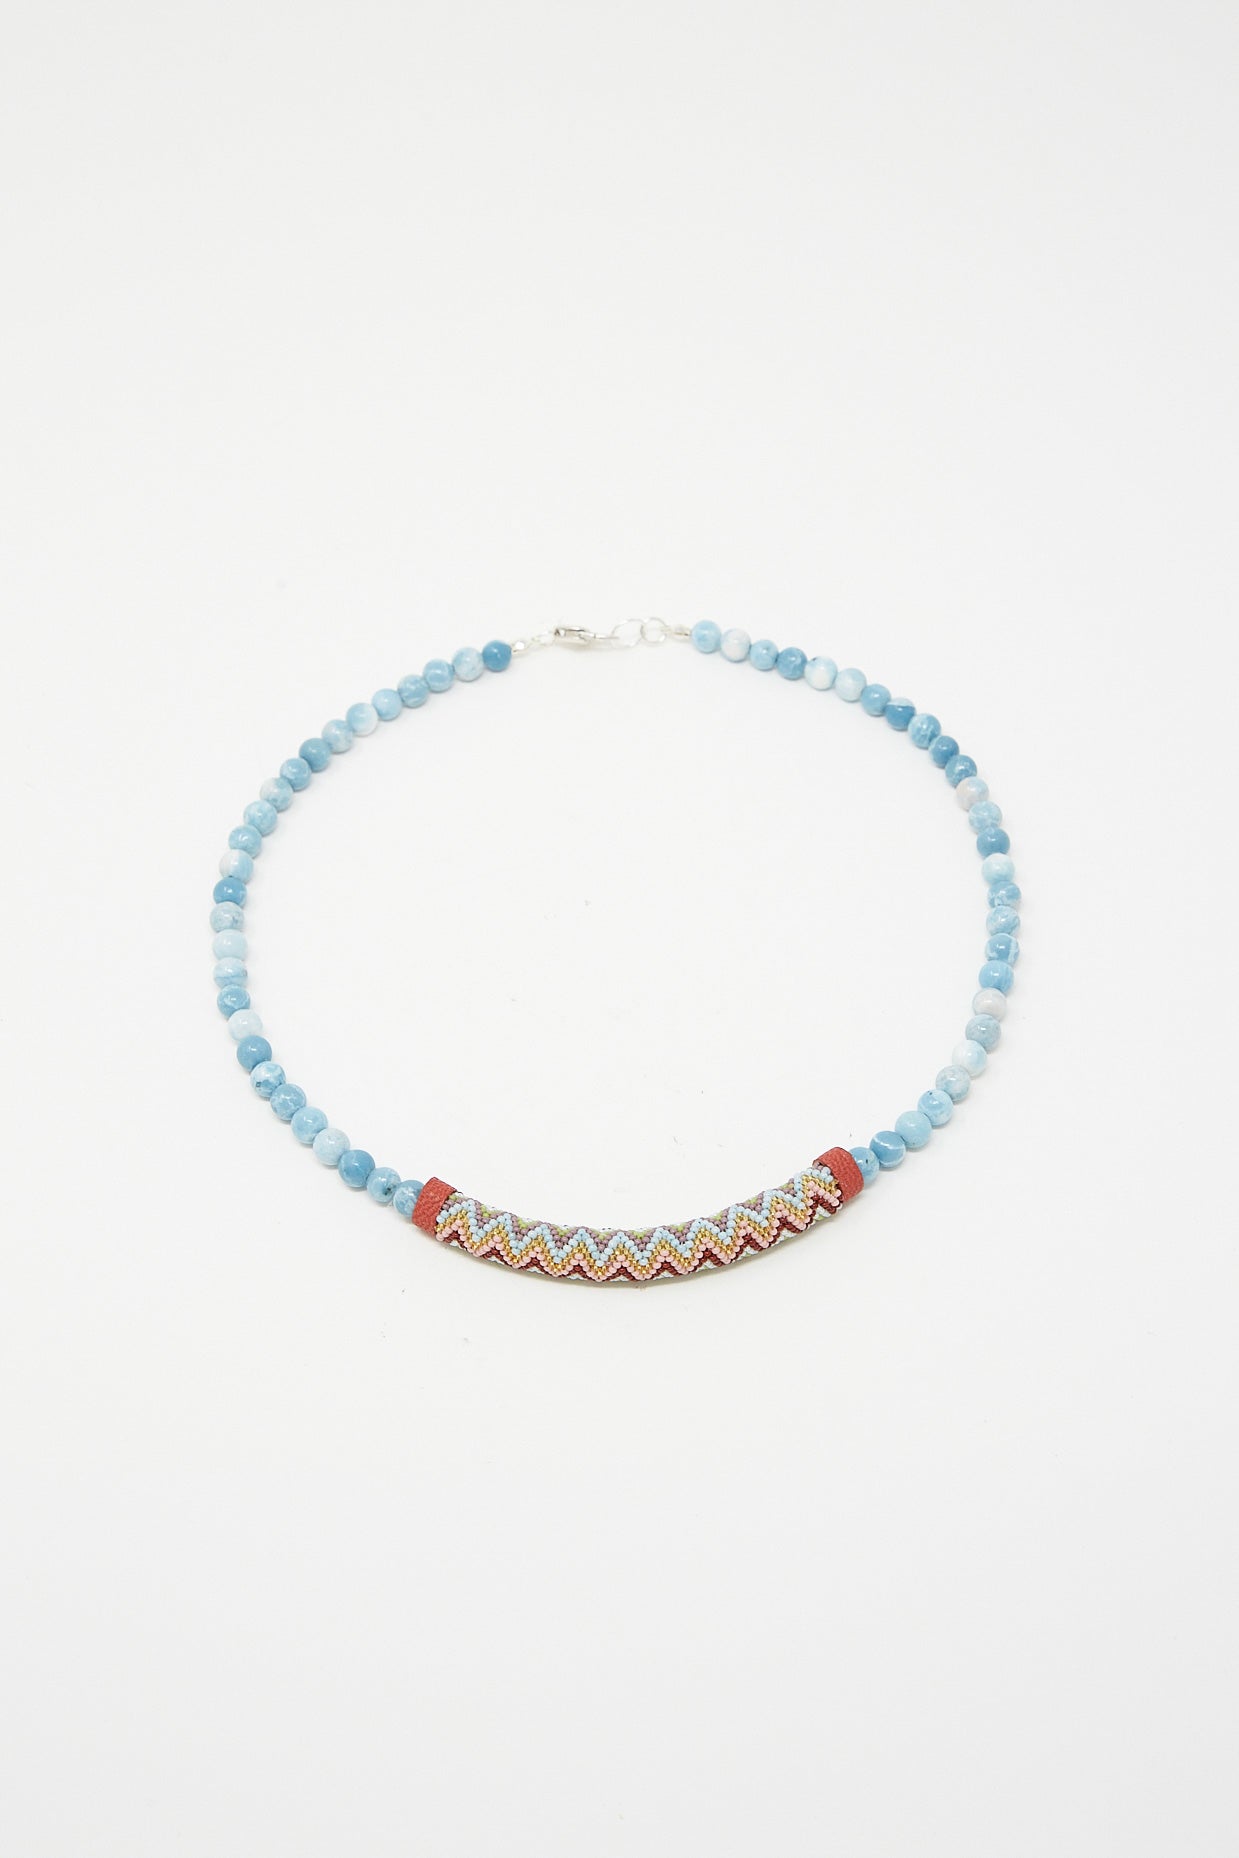 A Beaded Bar Necklace in Larimar with Robin Mollicone beads on a white background.